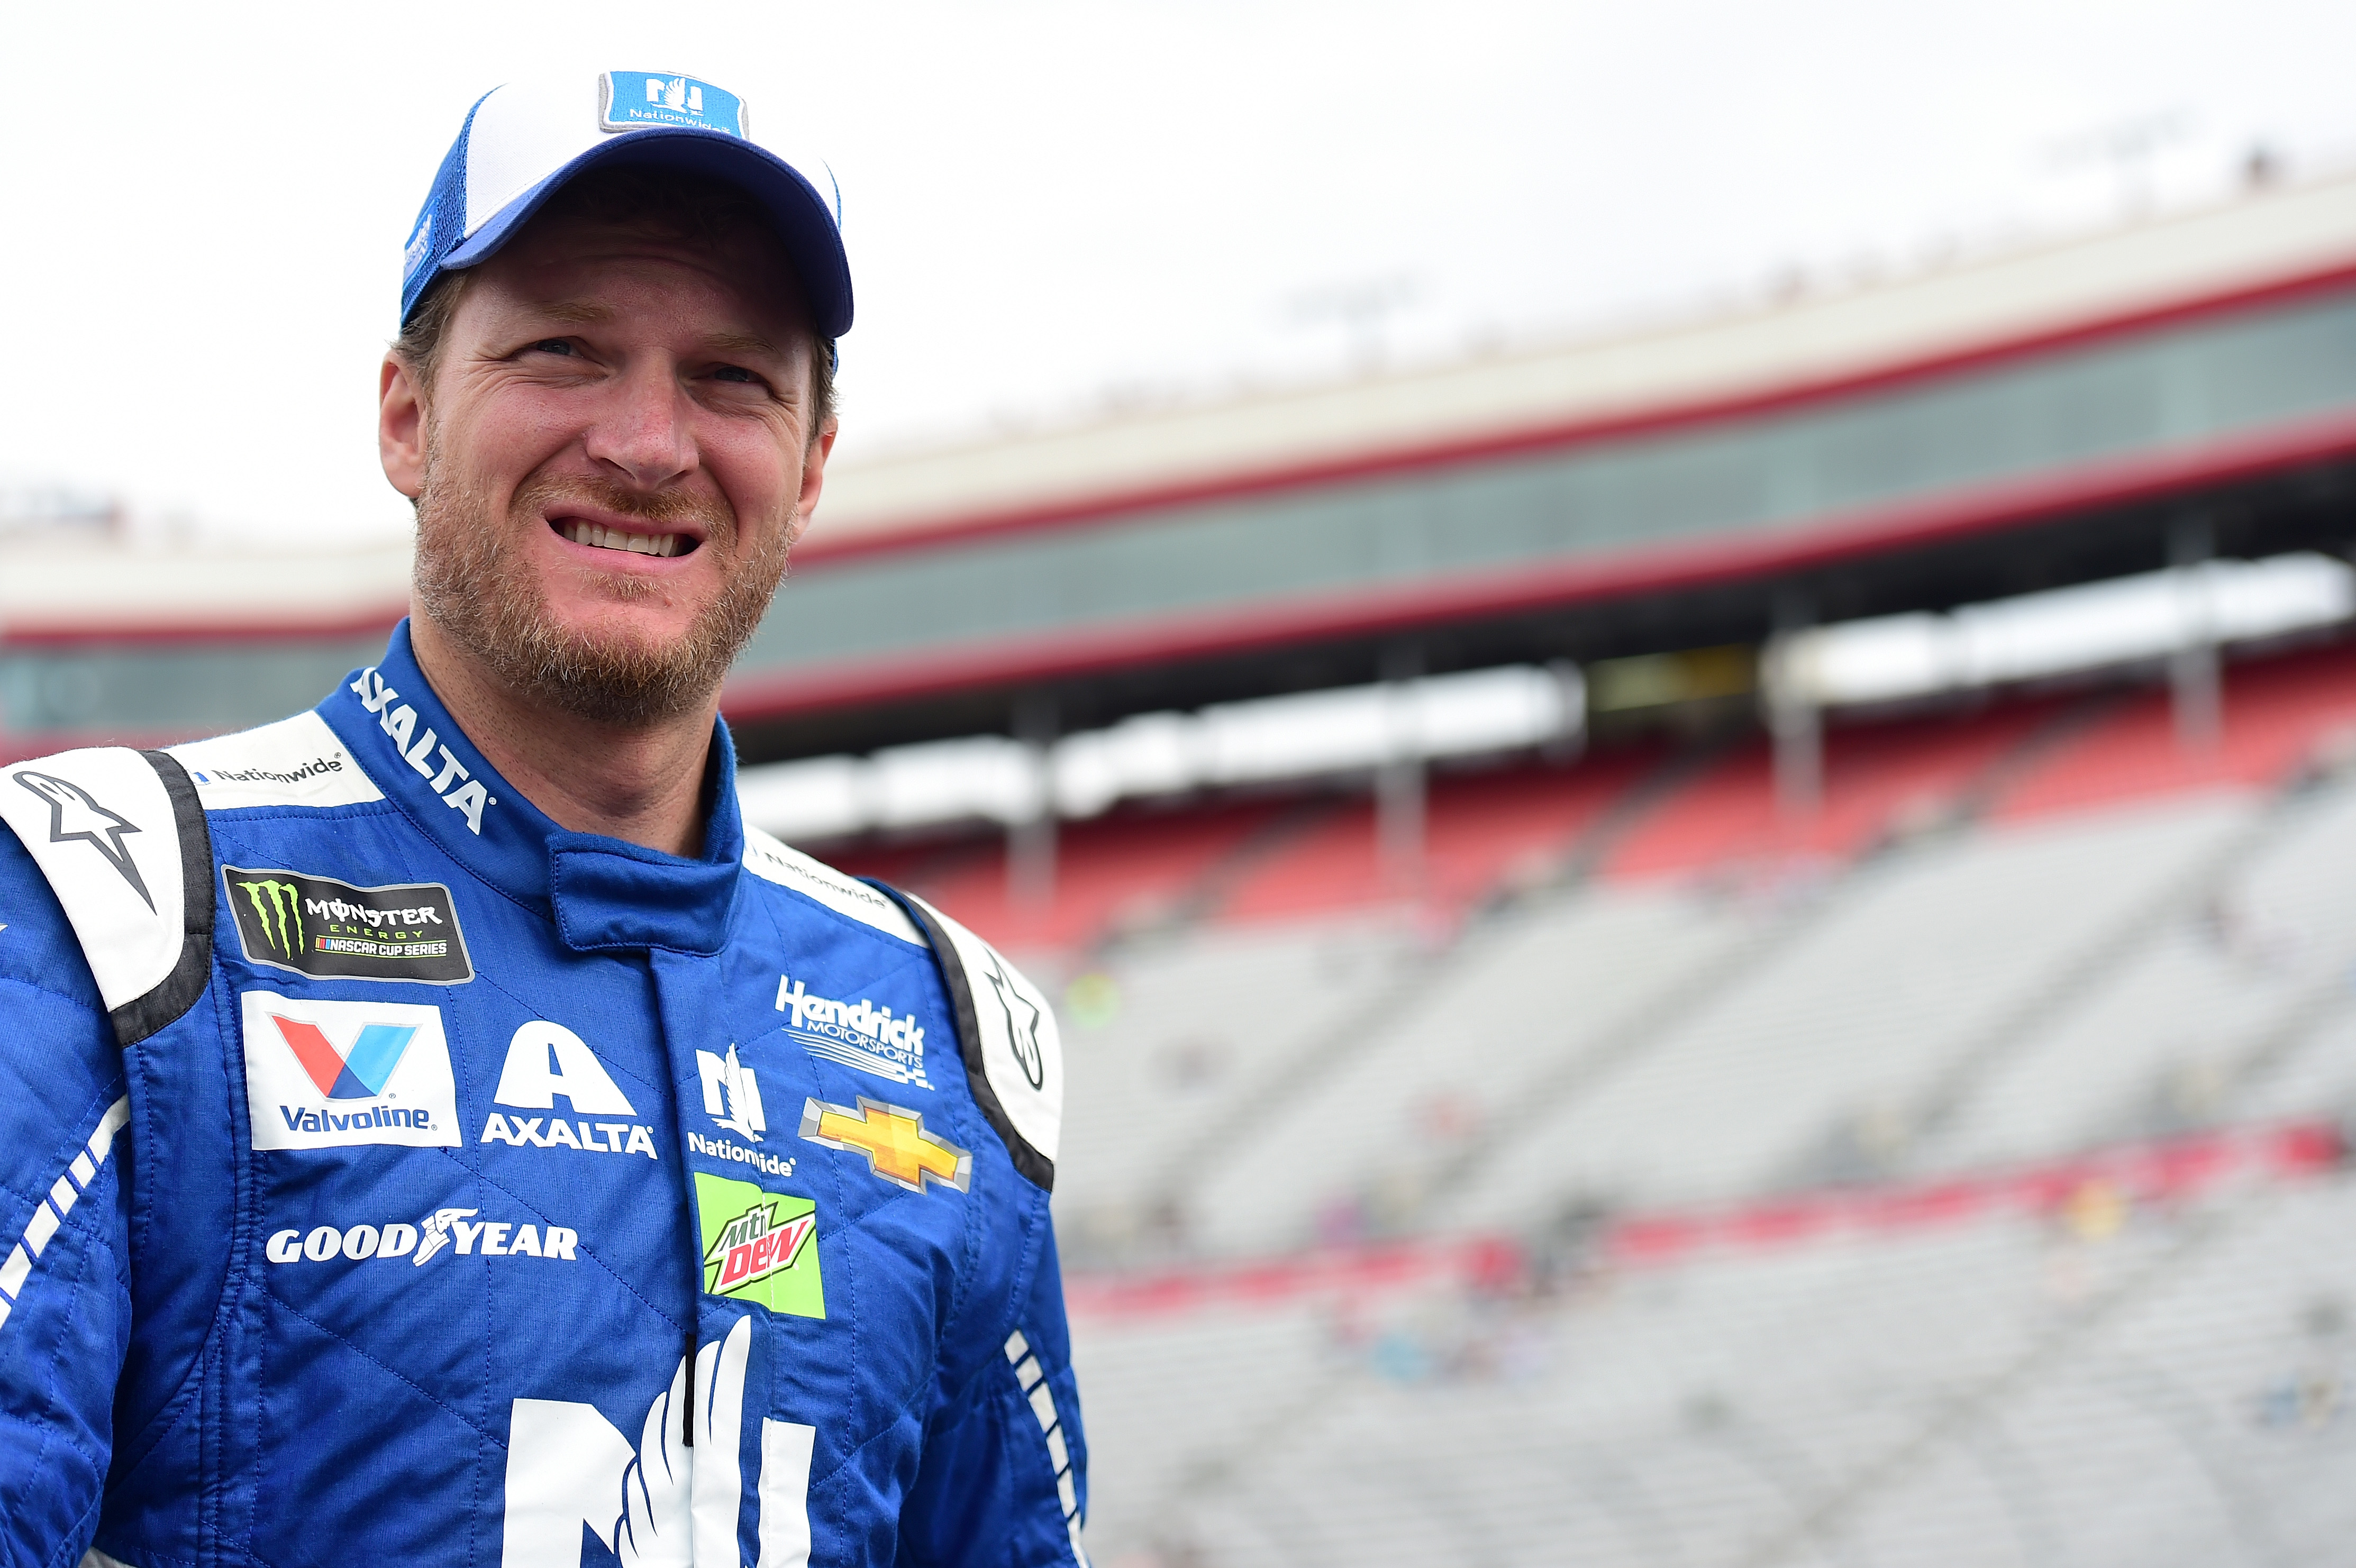 Dale Earnhardt Jr. walks through the garage area during practice for the Monster Energy NASCAR Cup Series Food City 500 at Bristol Motor Speedway on April 22, 2017 in Bristol, Tennessee. (Jared C. Tilton&mdash;Getty Images)